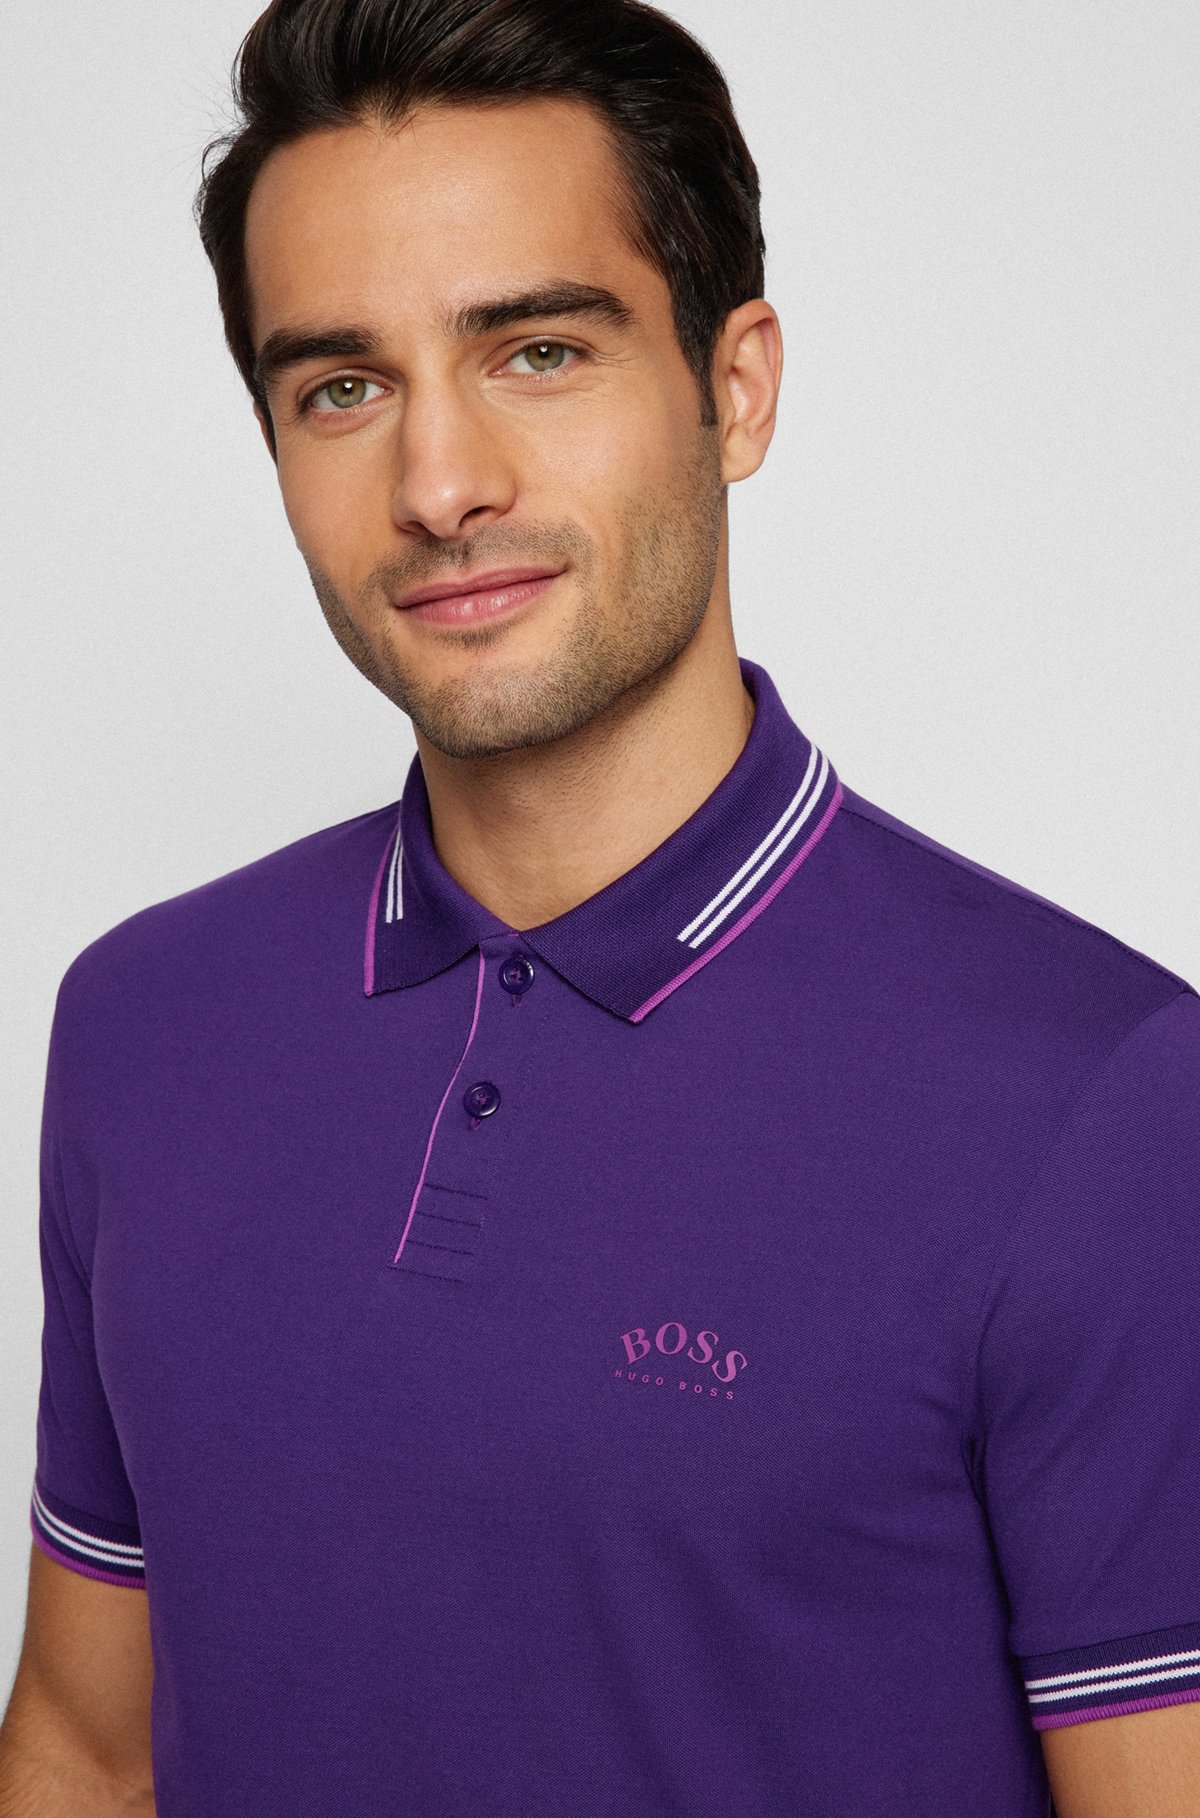 Kustlijn Hong Kong formeel BOSS - Slim-fit polo shirt in stretch piqué with curved logo